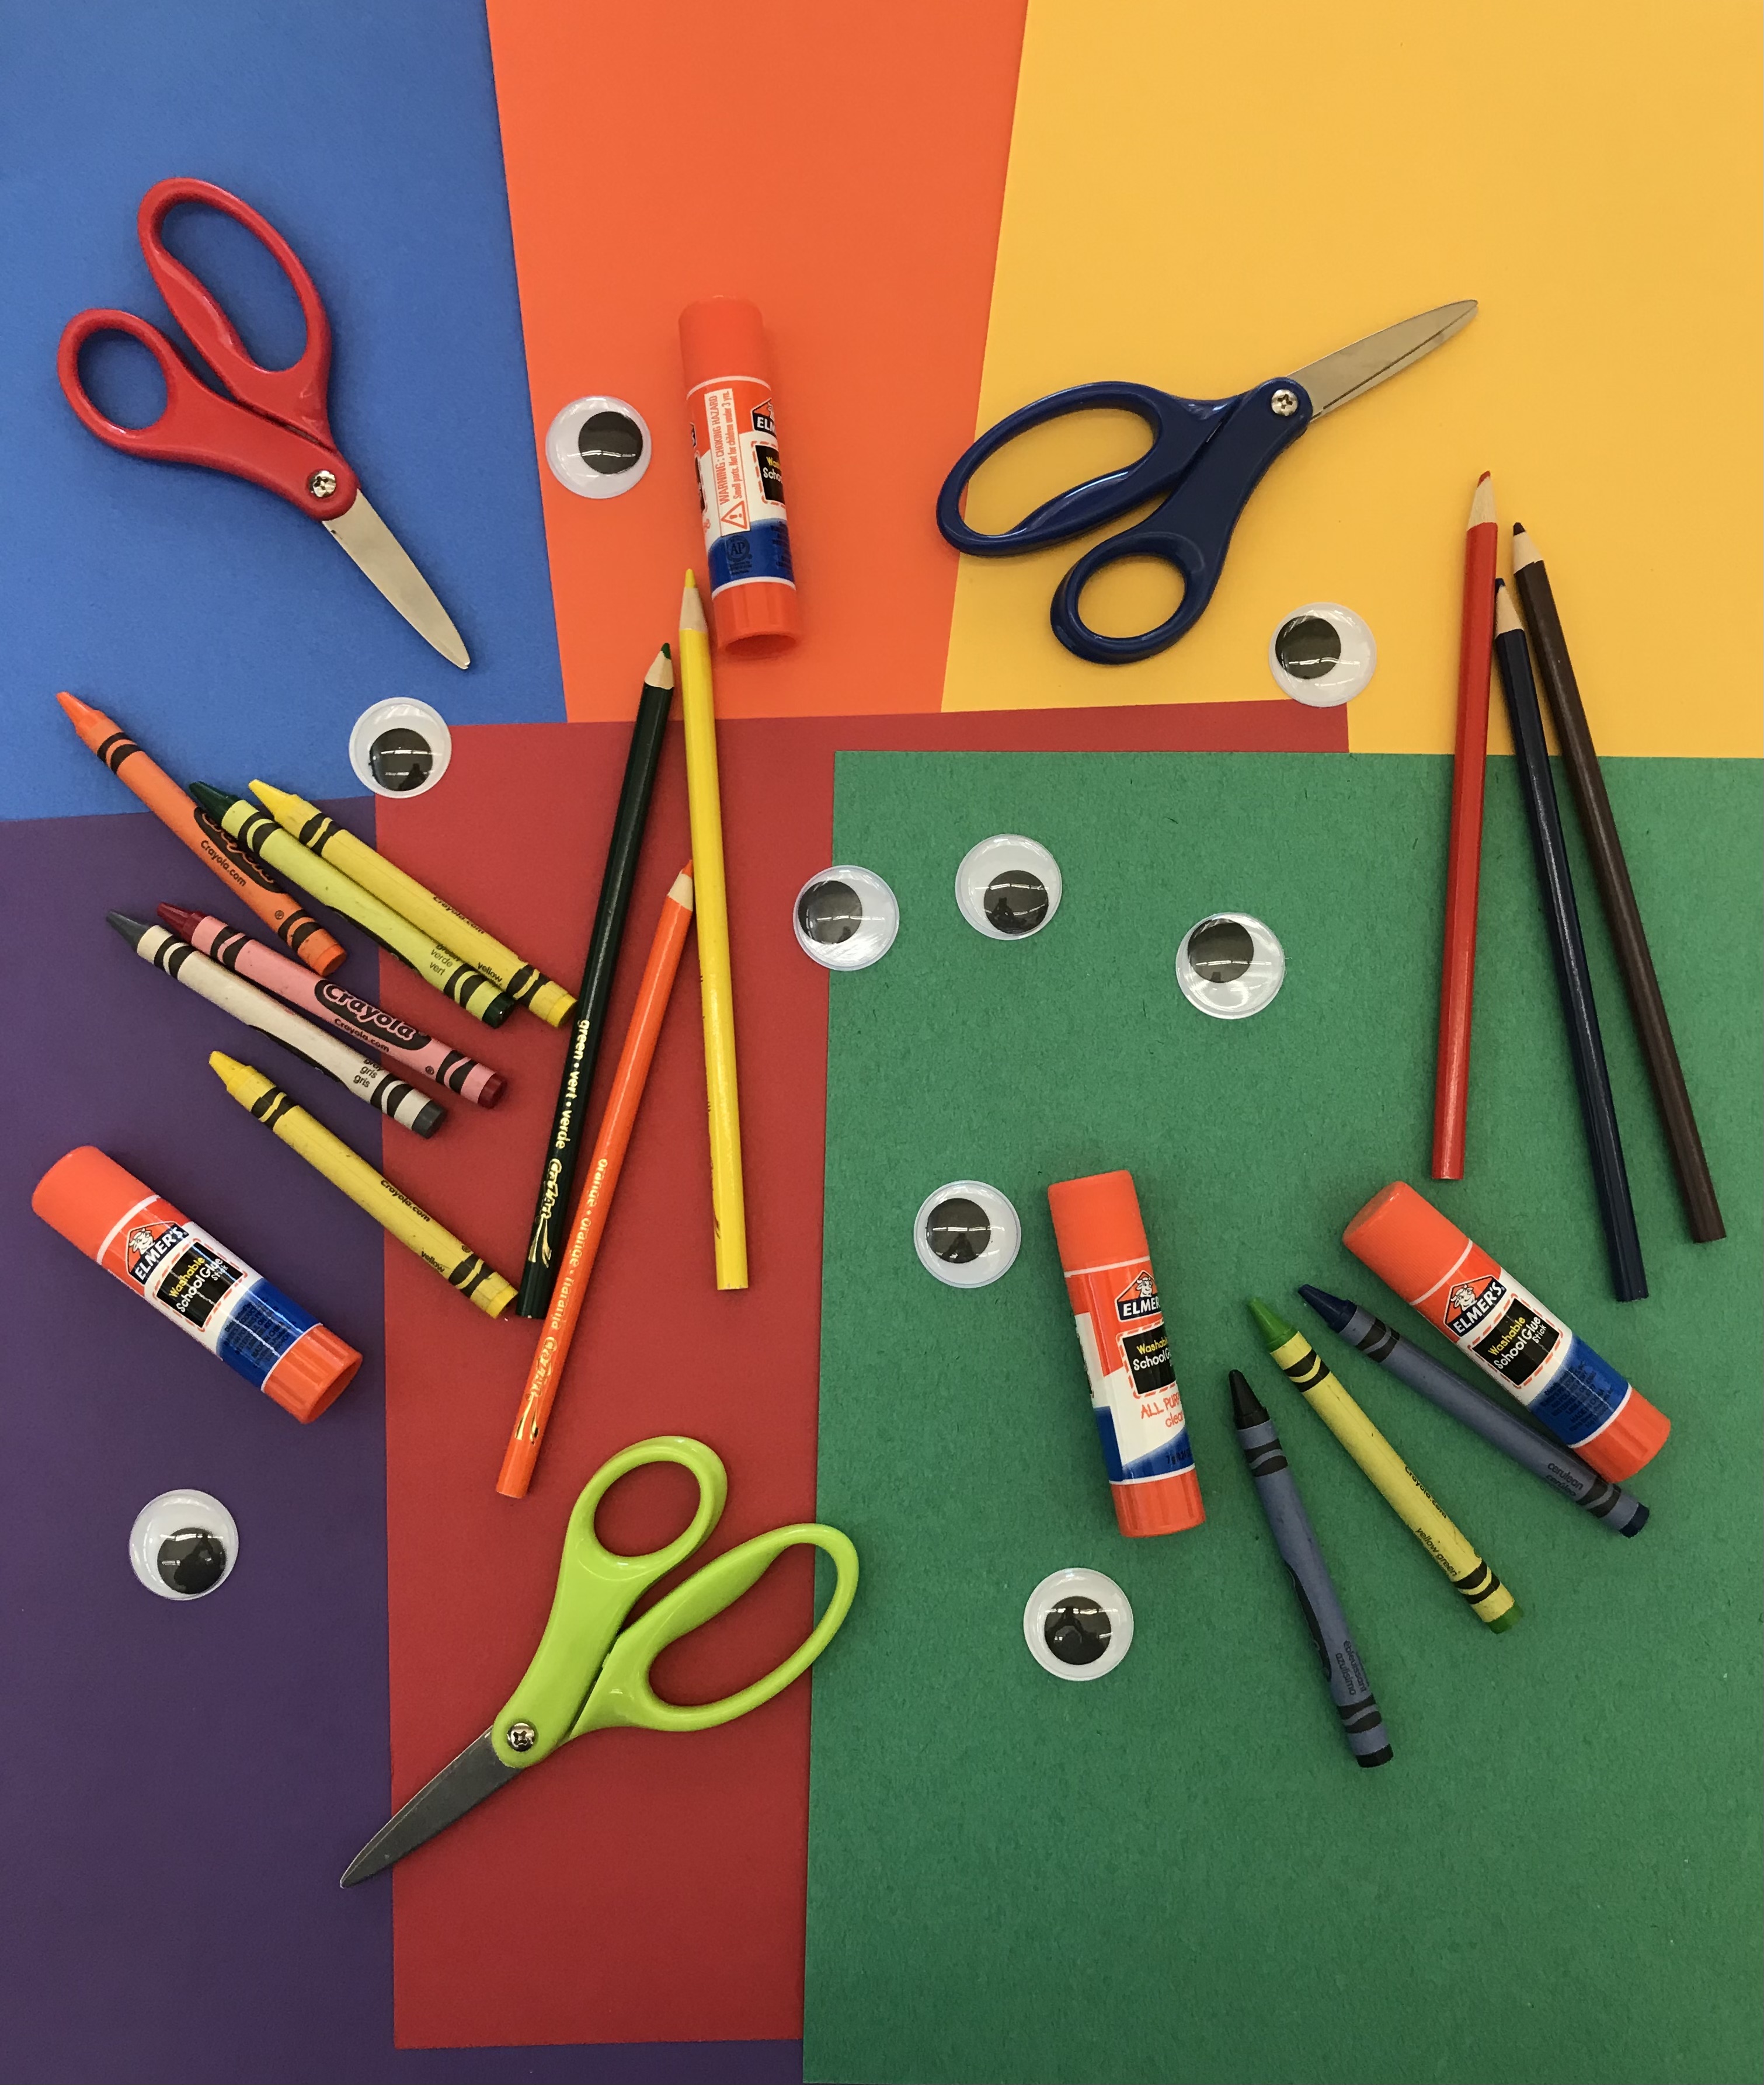 Craft supplies - glue, scissors, crayons, construction paper, wiggle eyes